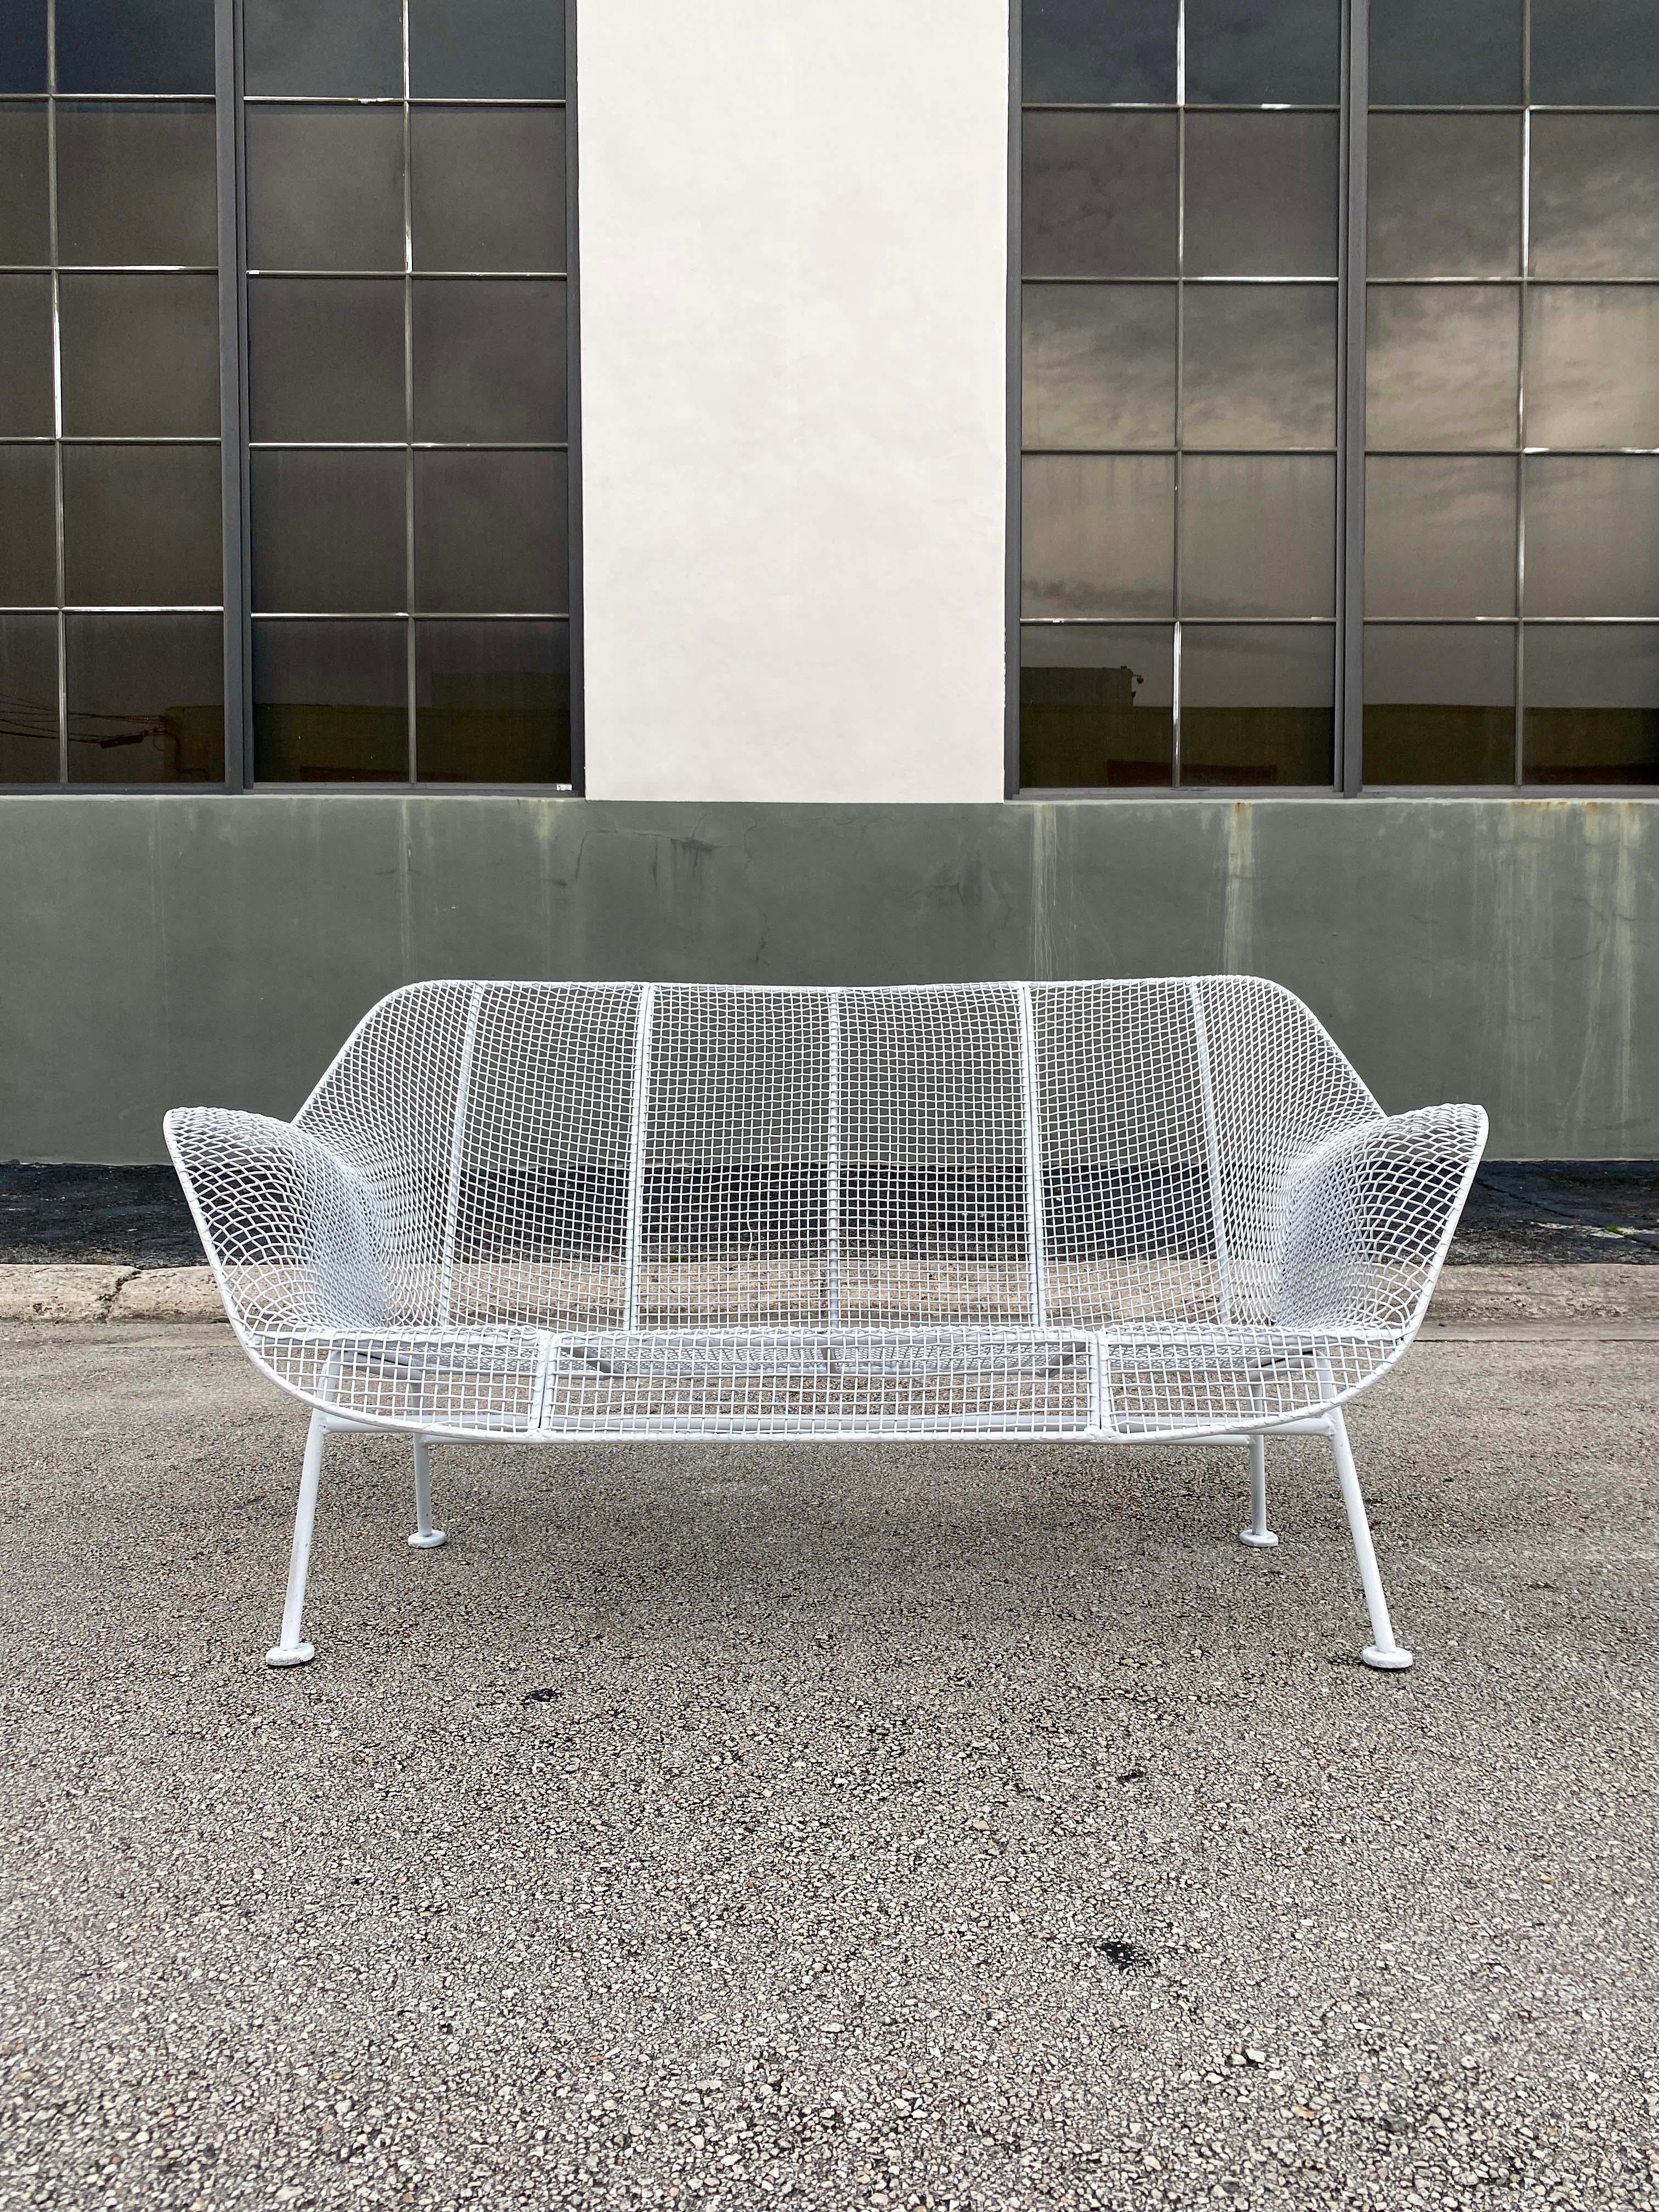 'Sculptura' wrought iron set of settees attributed to Russell Woodard. Freshly restored in gloss white. Circa 1950s.

28”H x 54”W x 27”D x 13”H.